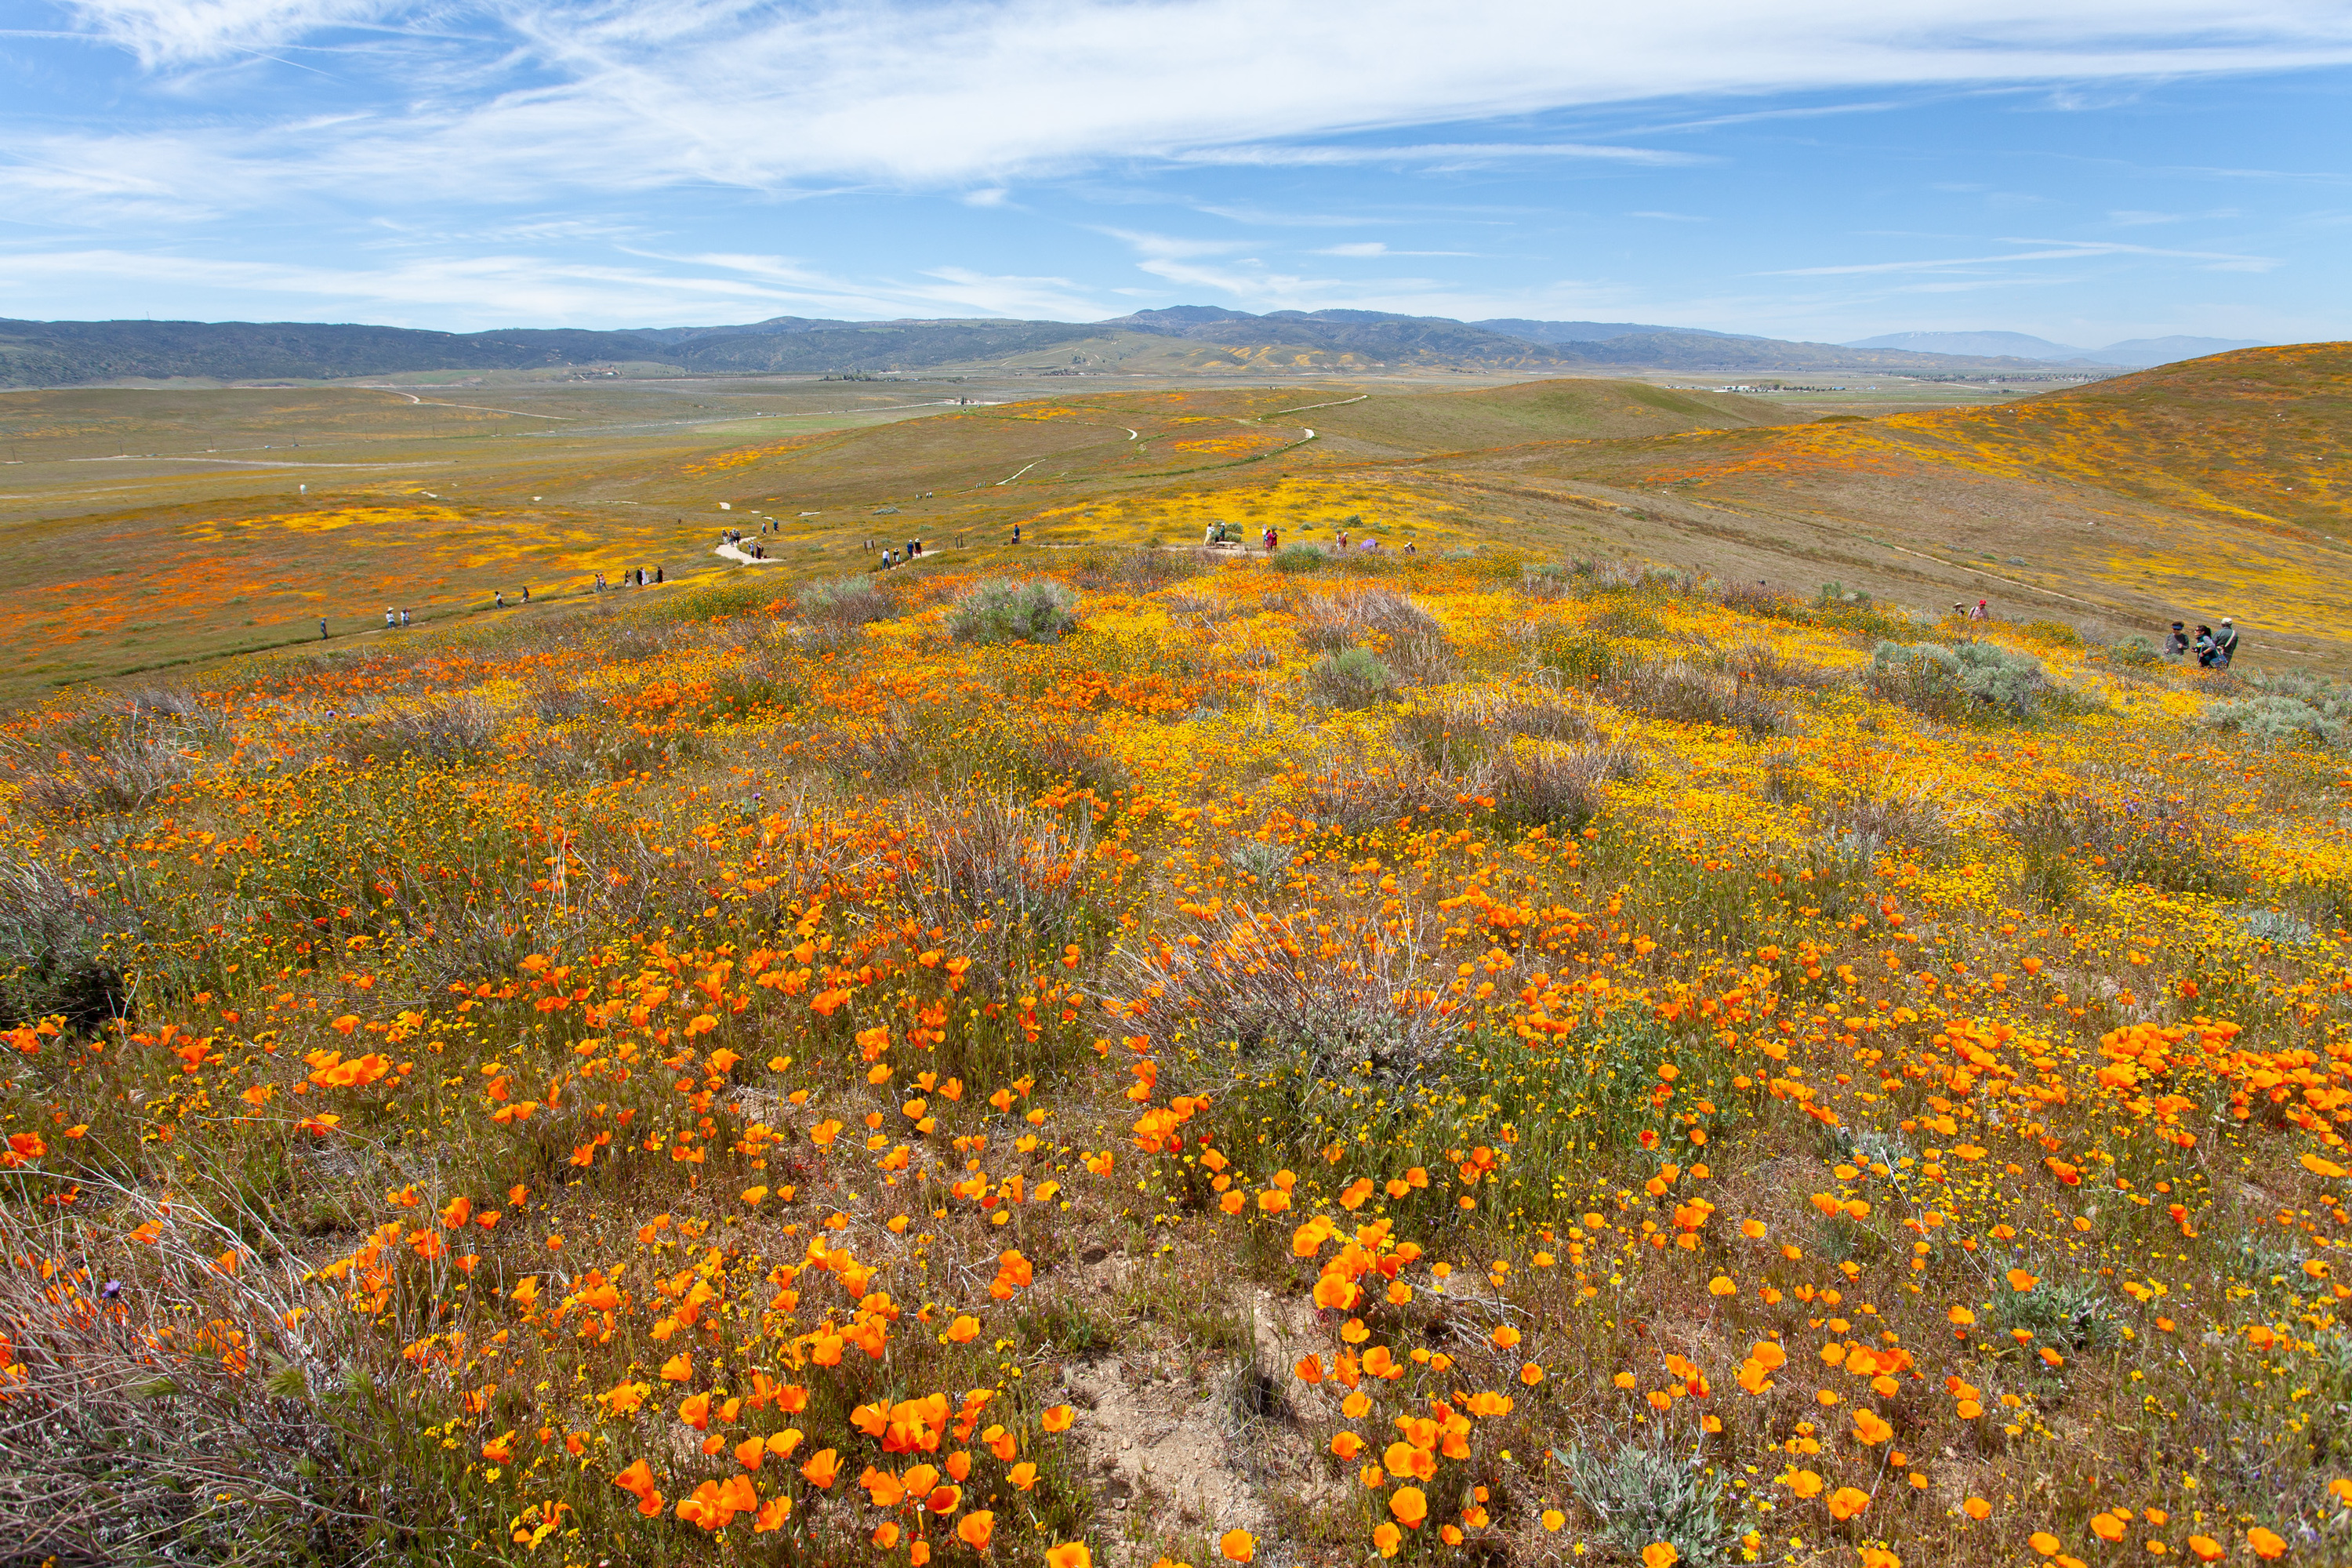 Where to See California Poppies in Full Bloom (2023 Guide)